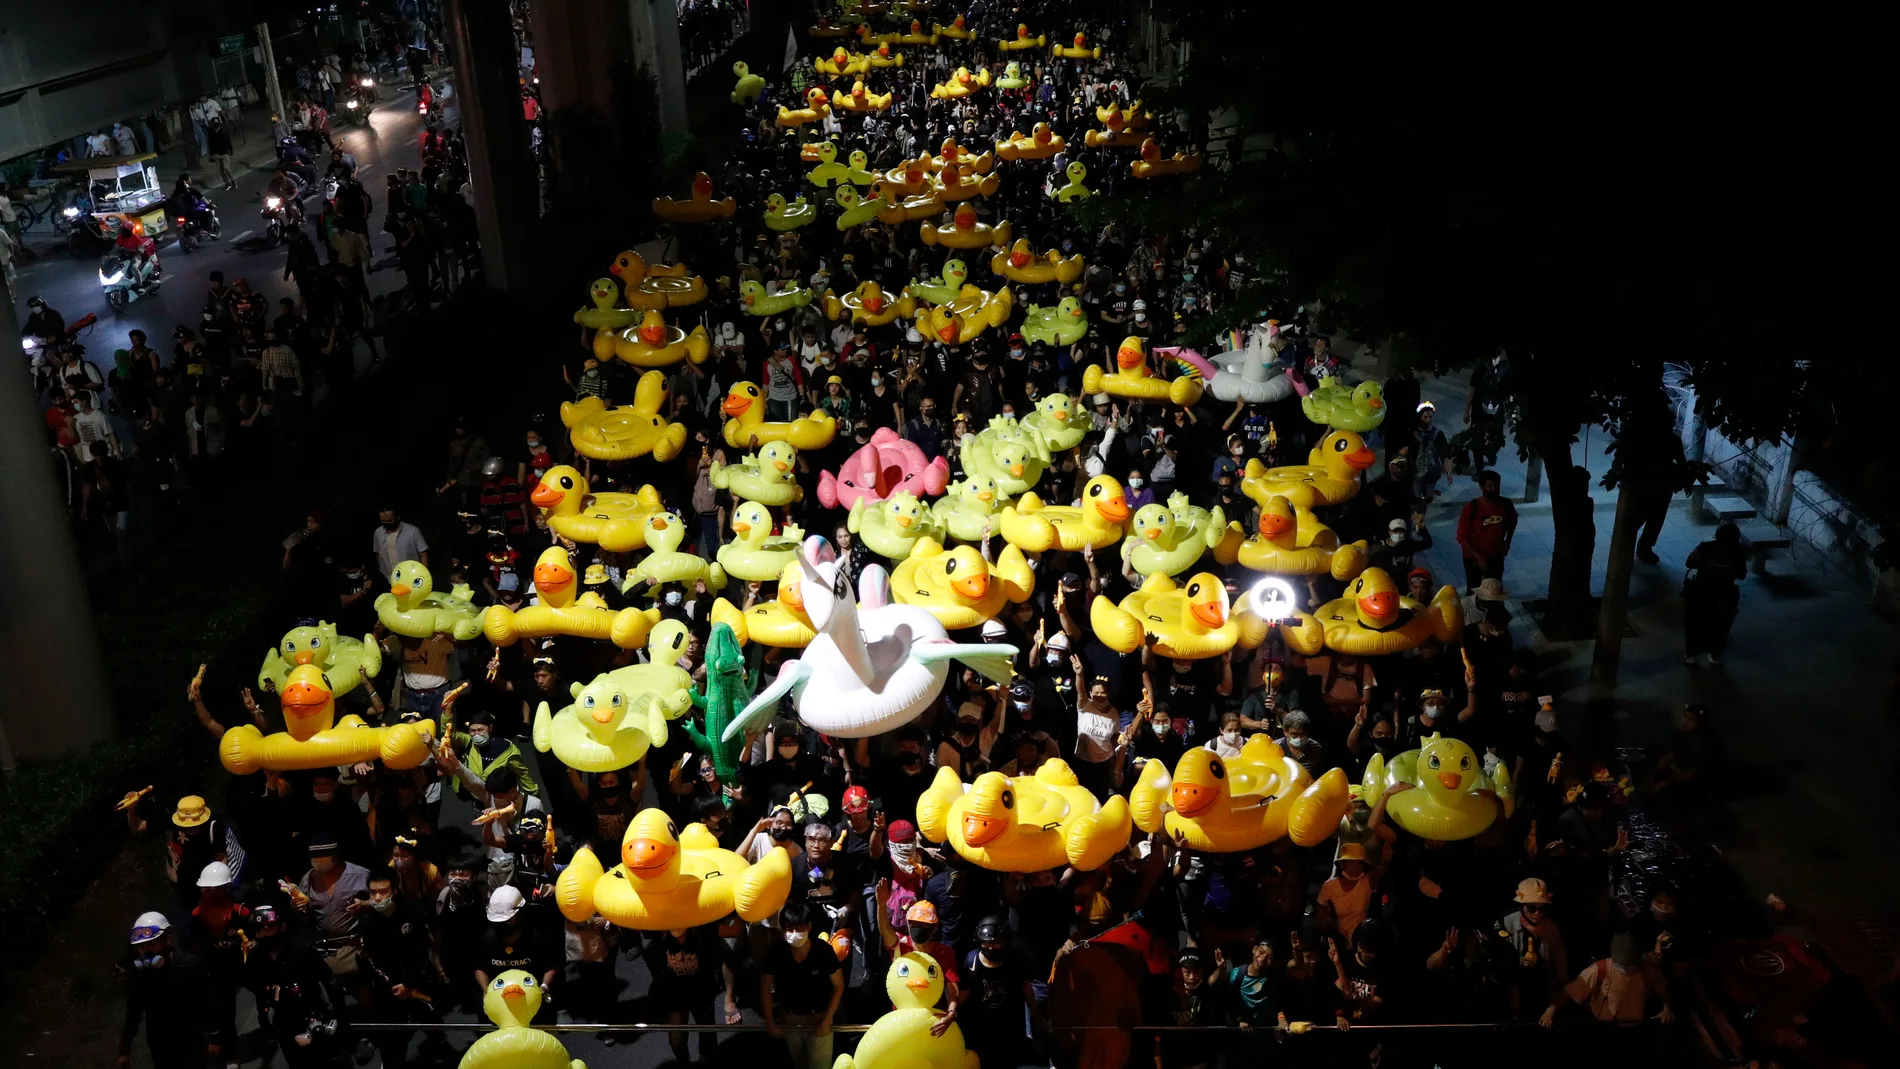 Bangkok (Thailand), 29/11/2020.- Anti-government protesters march with inflatable rubber ducks during a street protest calling for a political and monarchy reform at the 11th Infantry Regiment, the headquarters of the King's Guard regiment in Bangkok, Thailand, 29 November 2020. Thailand's politics intensified by months-long street protests calling for the political and monarchy reform and the resignation of the prime minister. (Protestas, Tailandia) EFE/EPA/RUNGROJ YONGRIT